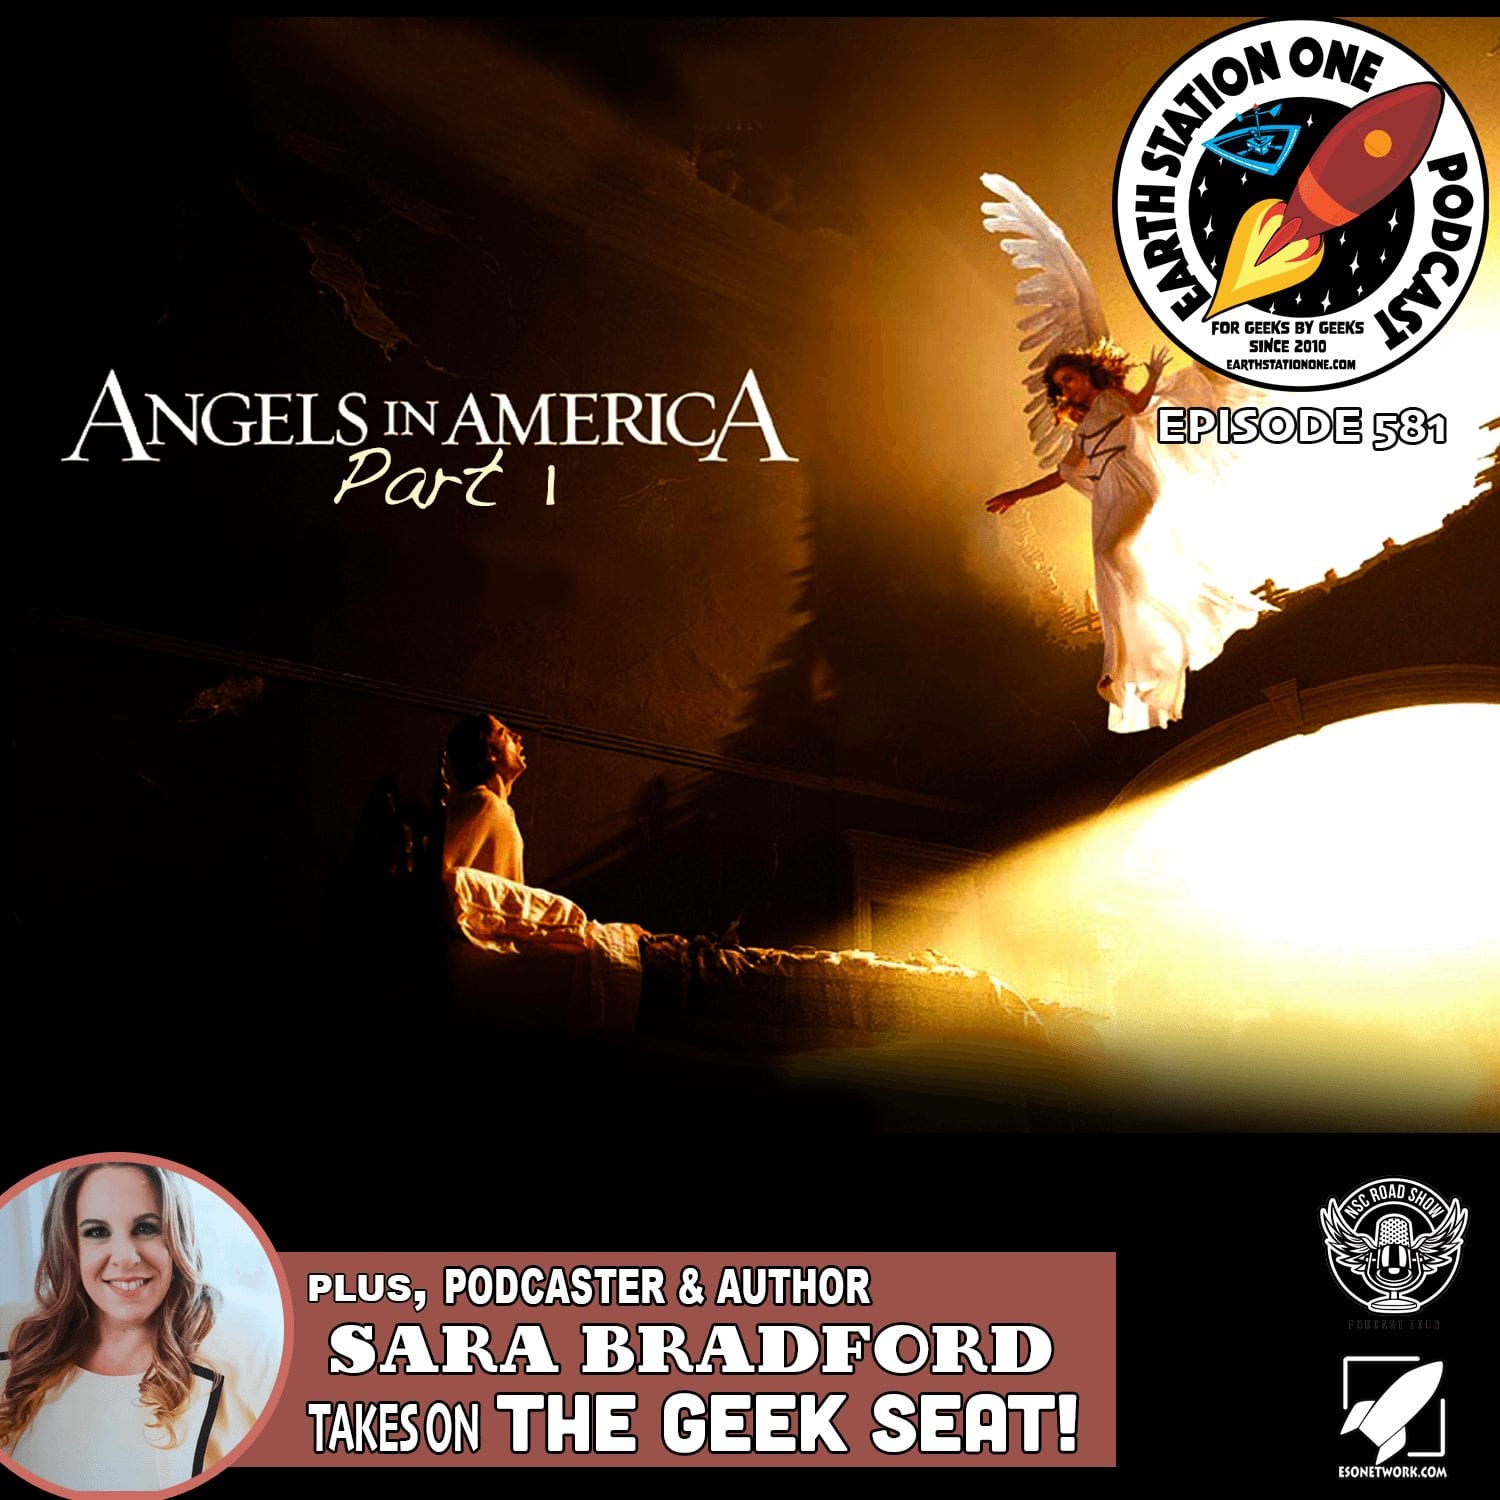 Earth Station One Ep 581 - Angels In America pt 1